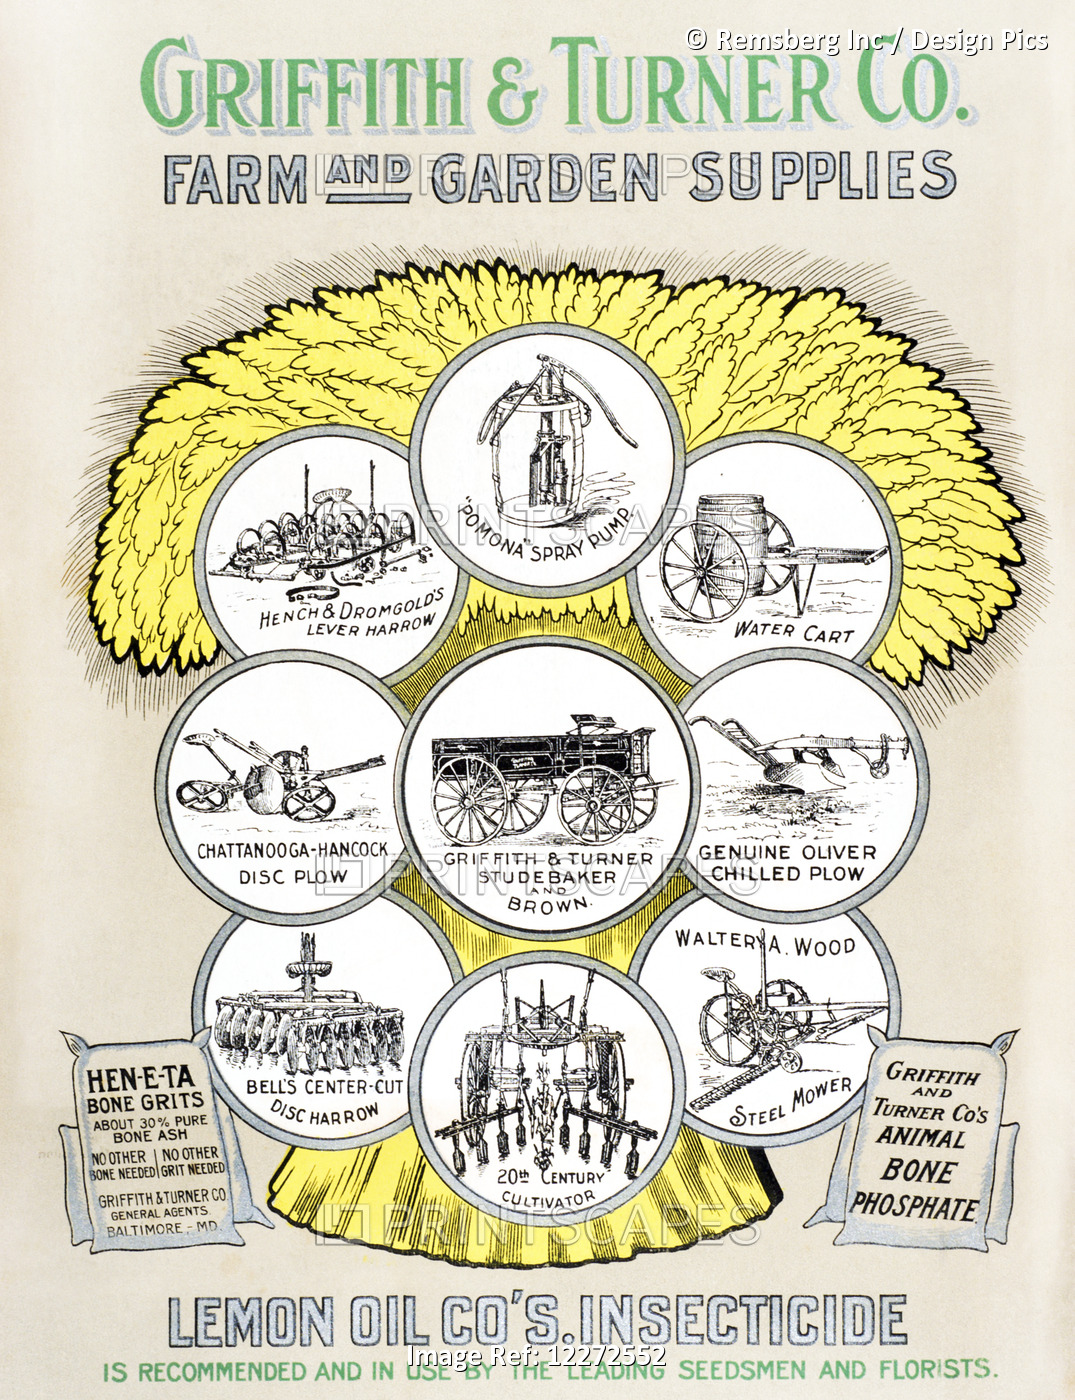 Griffith & Turner Co. Farm And Garden Supply Catalog From The 20th Century.